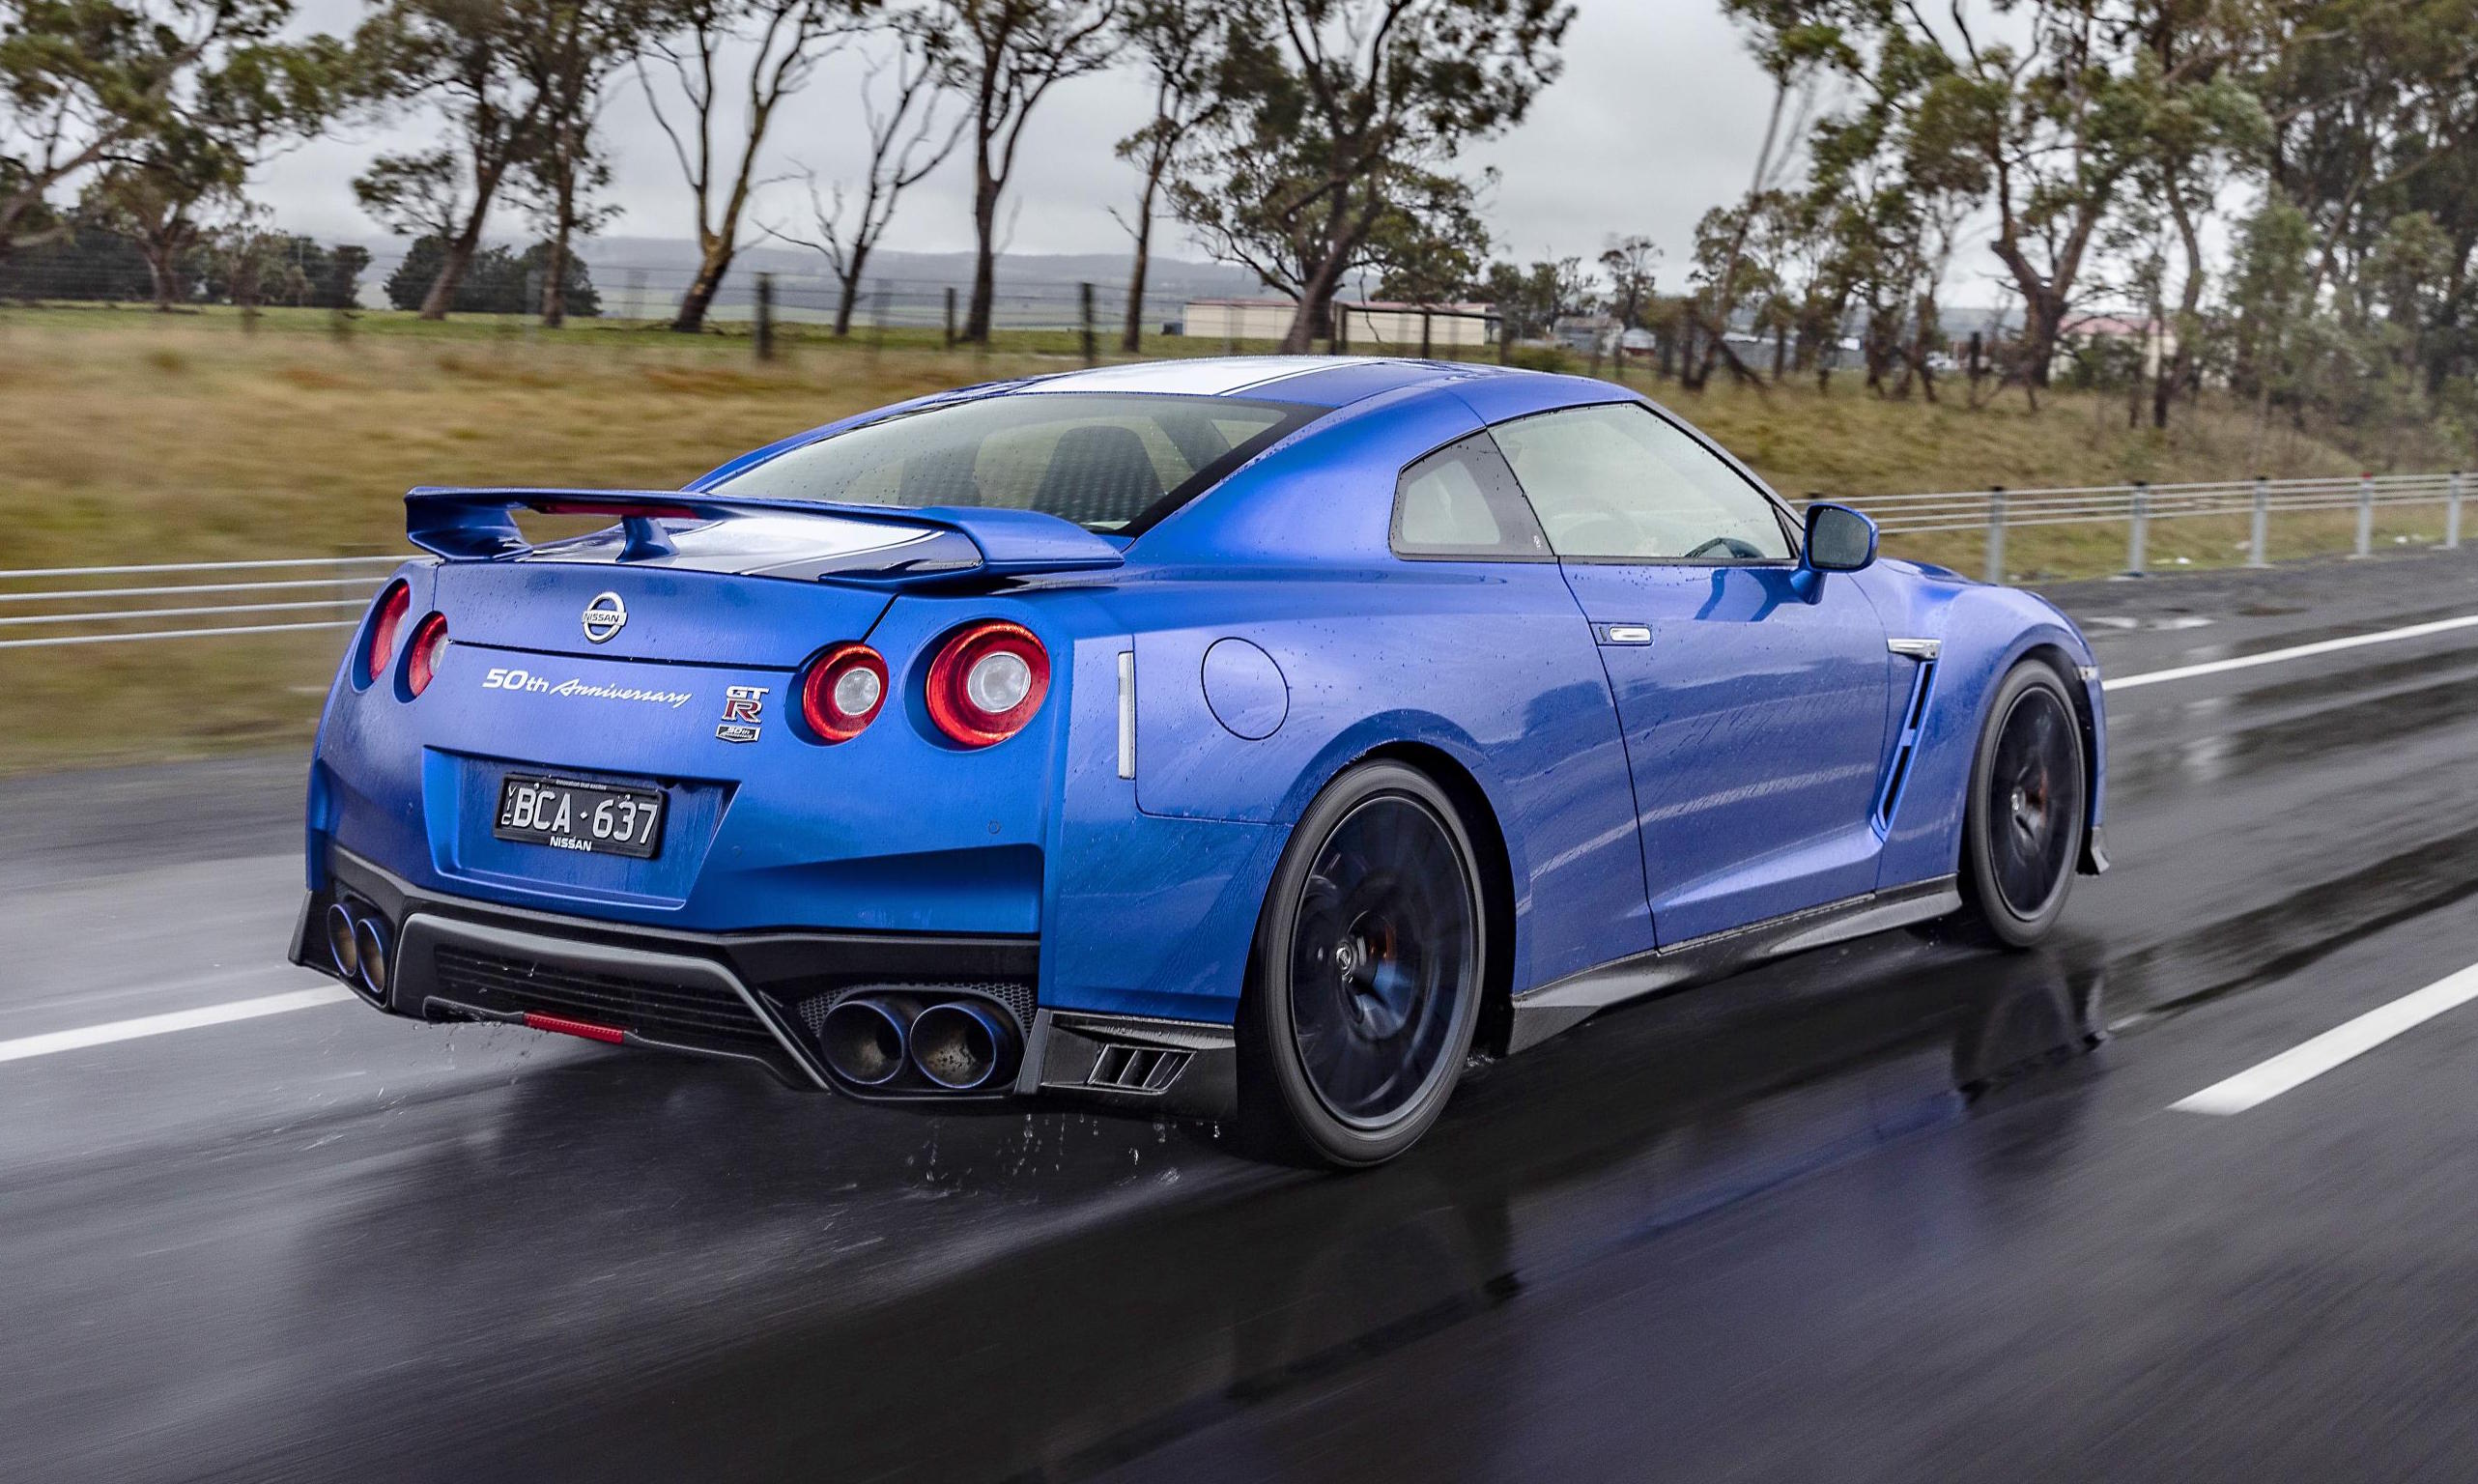 2020 Nissan GTR now on sale in Australia, with 50th Anniversary